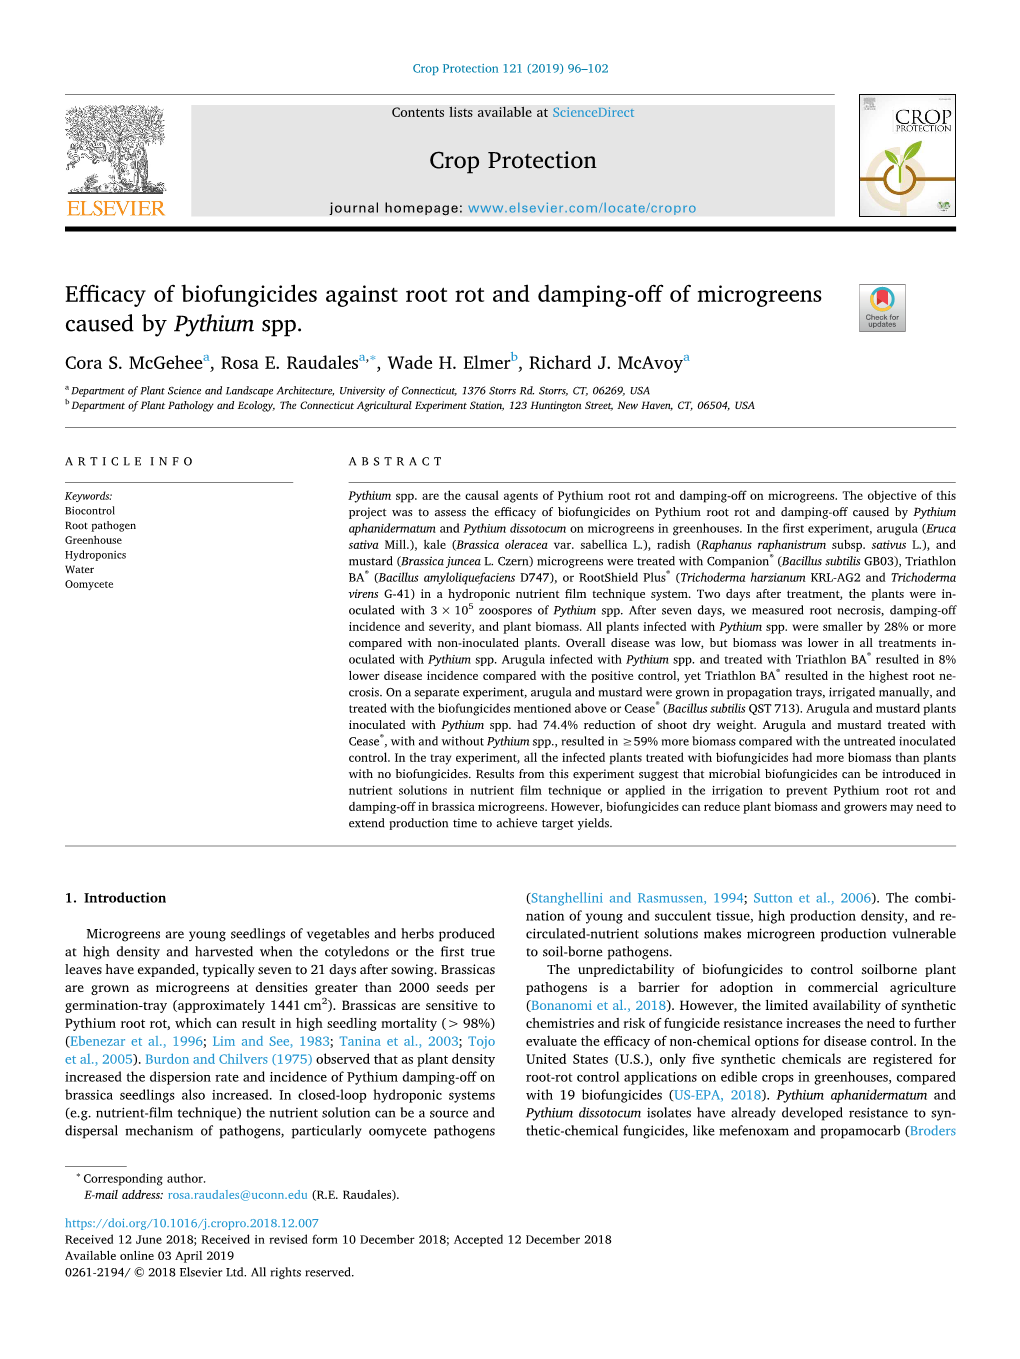 Efficacy of Biofungicides Against Root Rot and Damping-Off of Microgreens T Caused by Pythium Spp